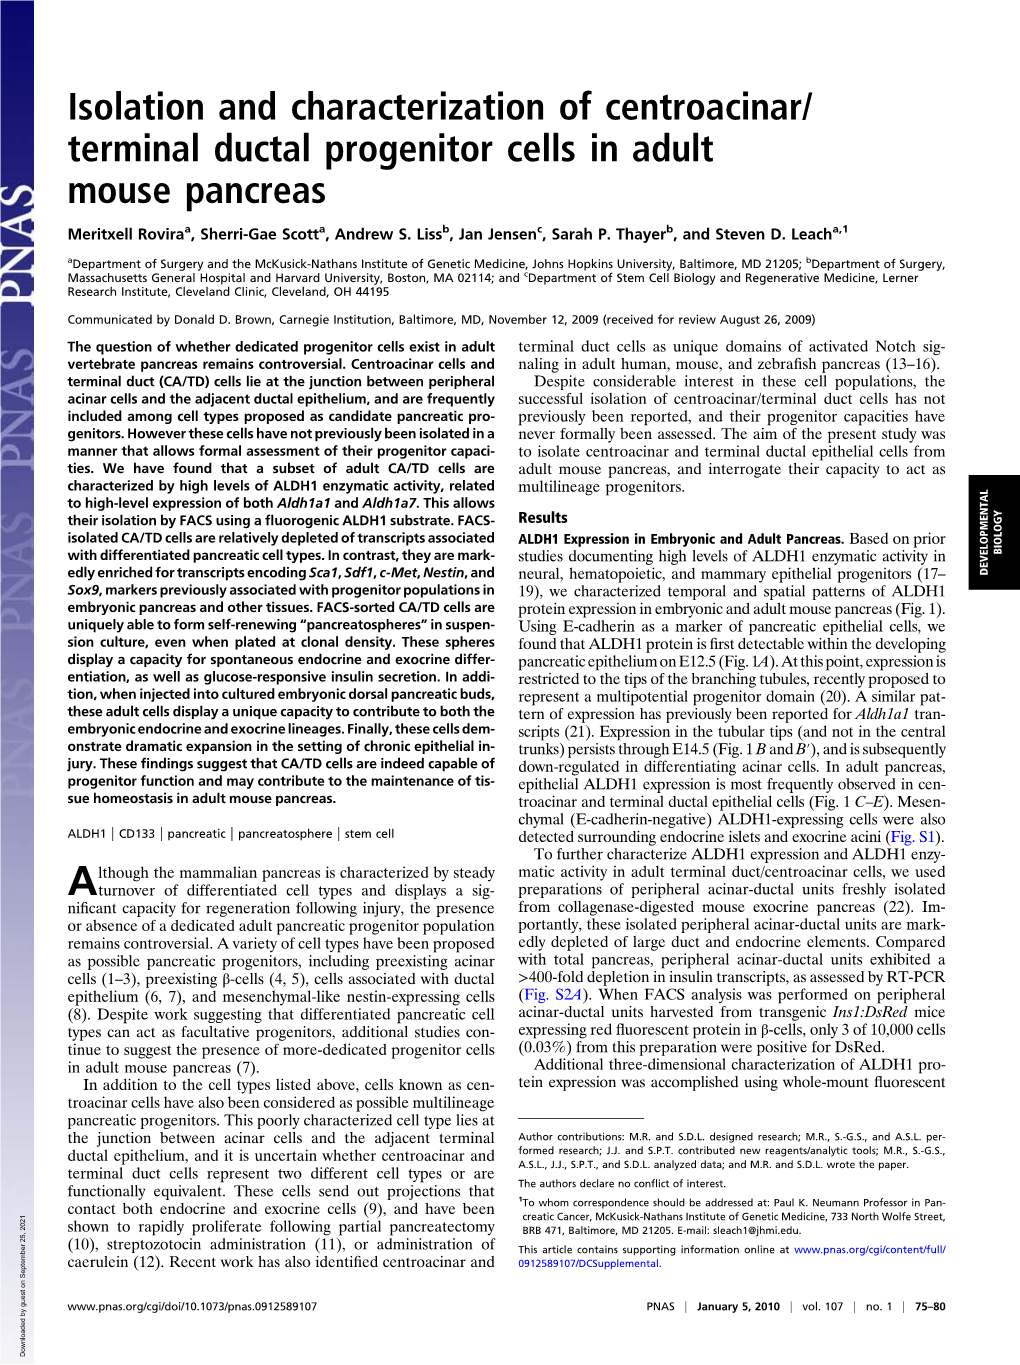 Terminal Ductal Progenitor Cells in Adult Mouse Pancreas